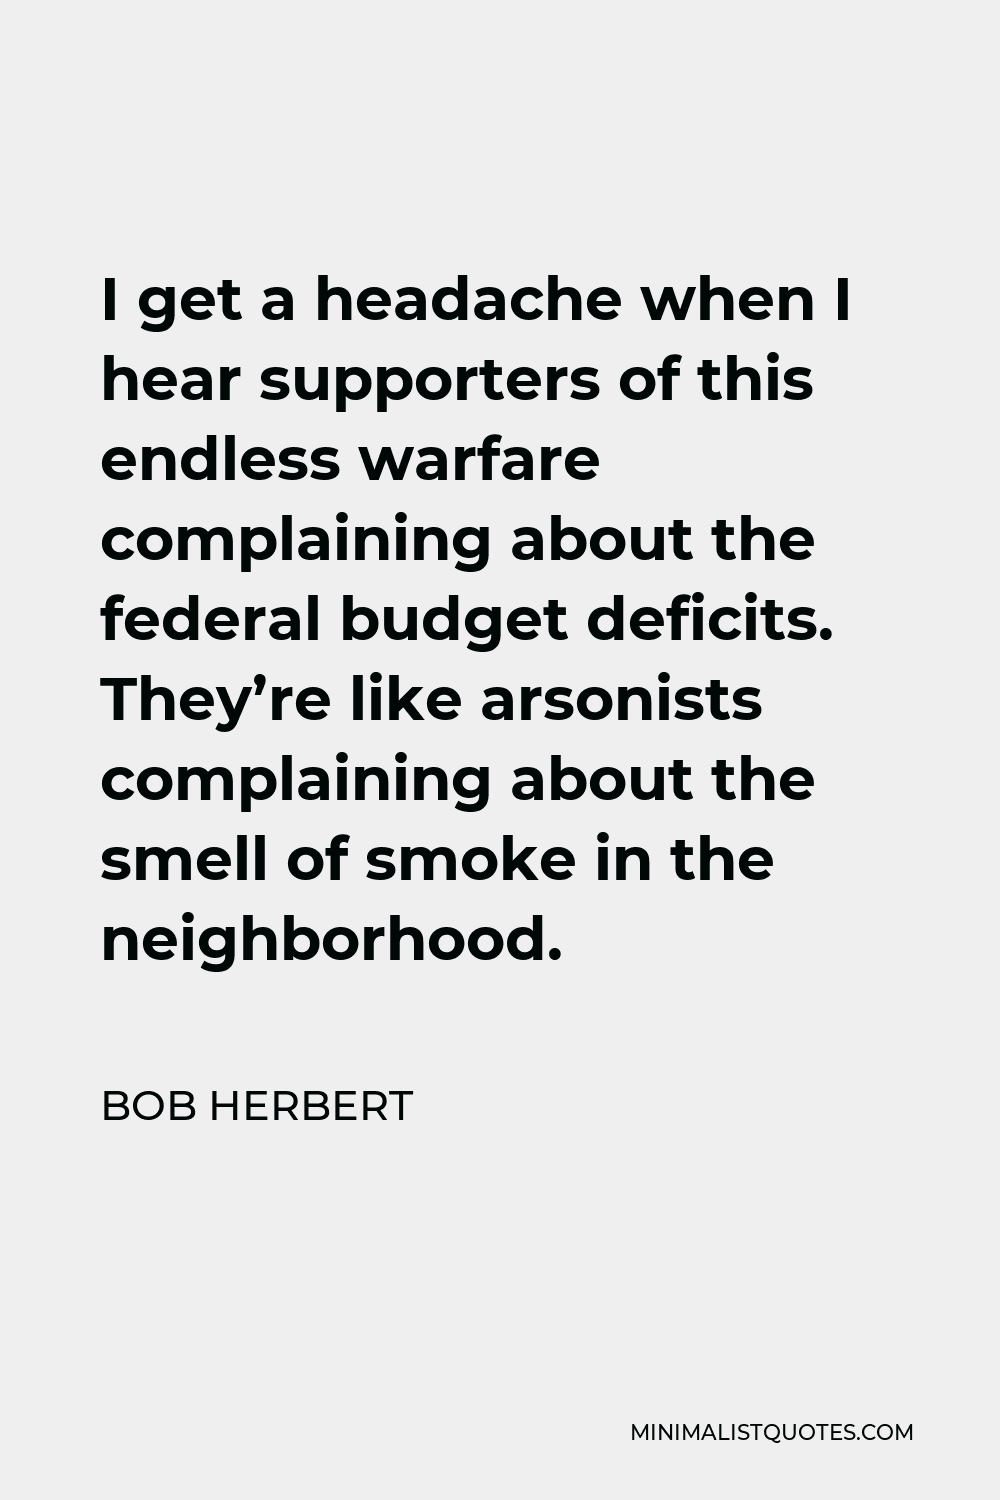 Bob Herbert Quote - I get a headache when I hear supporters of this endless warfare complaining about the federal budget deficits. They’re like arsonists complaining about the smell of smoke in the neighborhood.